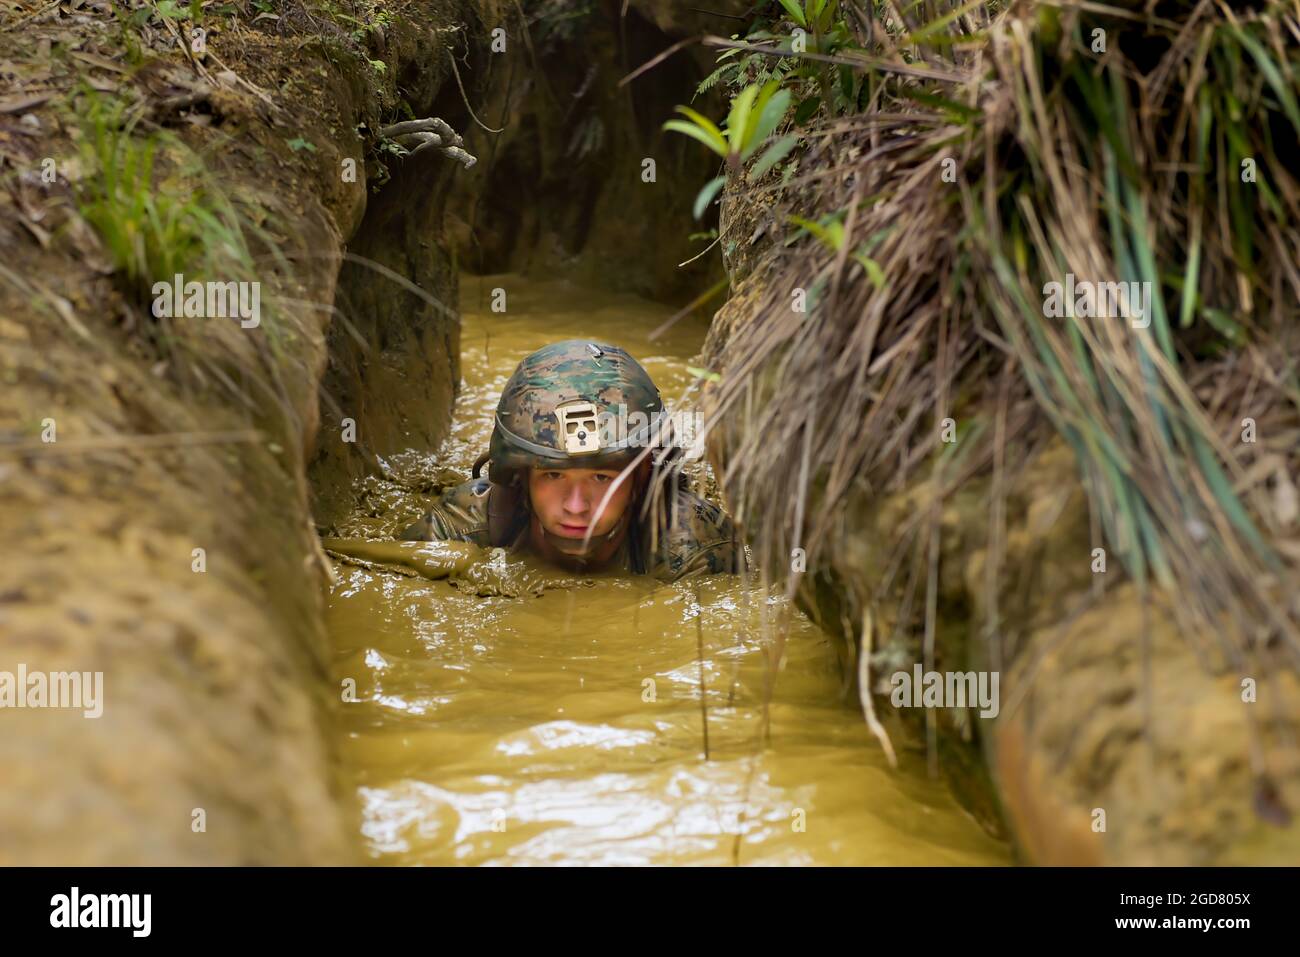 OKINAWA, Japan (Apr. 15, 2021) Seabees with Naval Mobile Construction Battalion (NMCB) 4 and Marines with 9th Engineer Support Battalion maneuver through a course at the Jungle Warfare Training Center. NMCB-4, based out of Port Hueneme, California, is forward-deployed throughout the Indo-Pacific region ready to deliver engineering solutions and construction of expeditionary and advanced naval base facilities to Naval and Joint Force Commanders. (U.S. Navy photo by Mass Communication Specialist 2nd Class Douglas Parker) Stock Photo